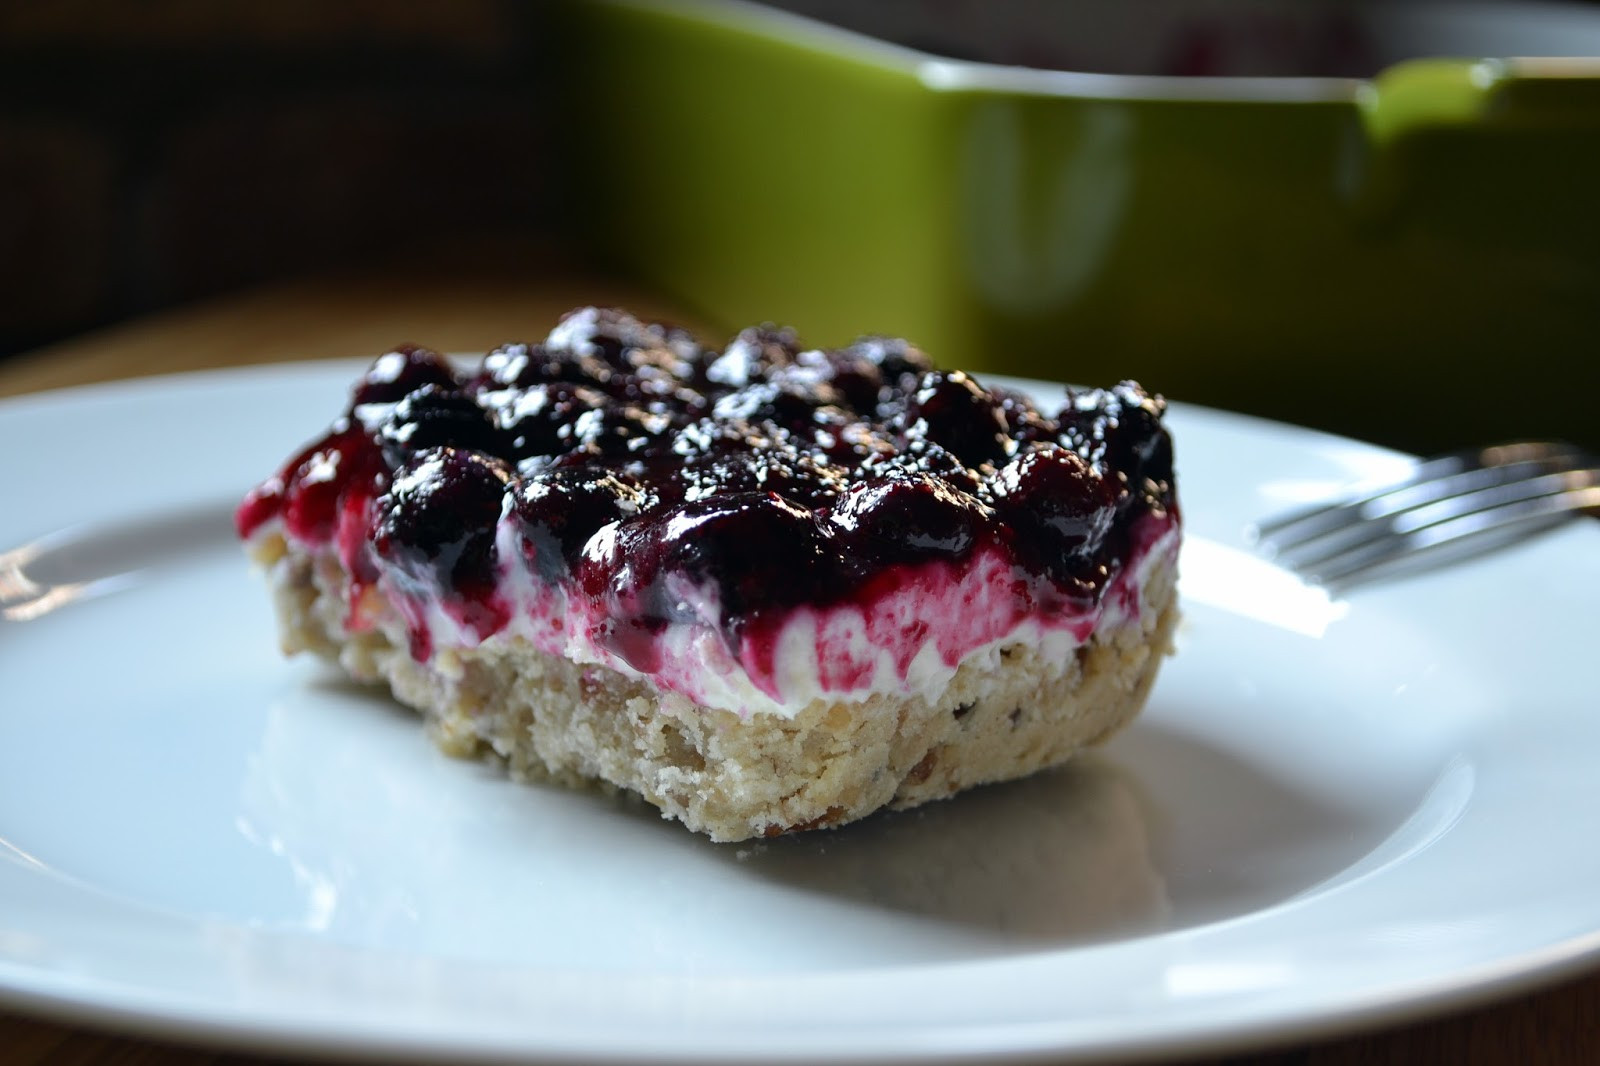 Blueberry Dessert Recipes With Cream Cheese
 Hardly Housewives Blueberry Cream Cheese Dessert